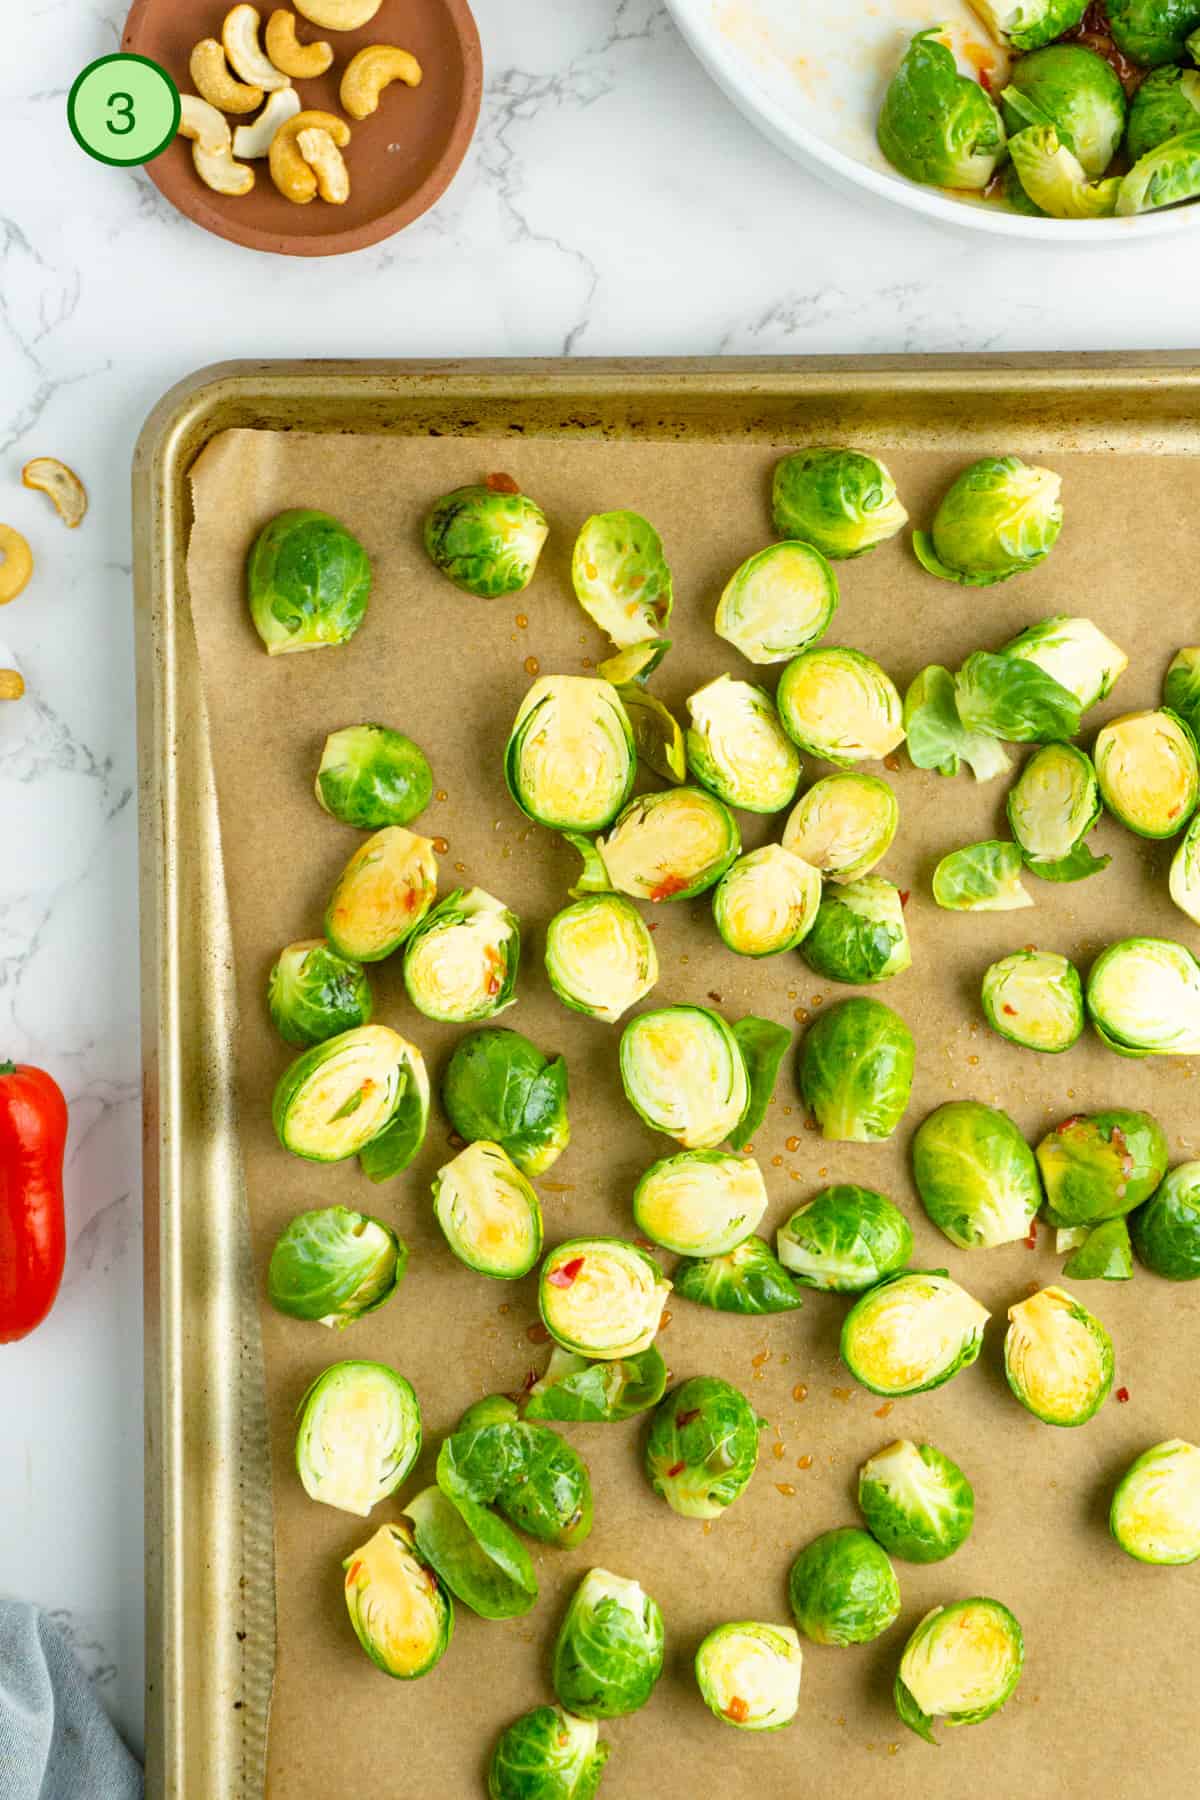 Roast the brussels sprouts in the oven in a single layer.